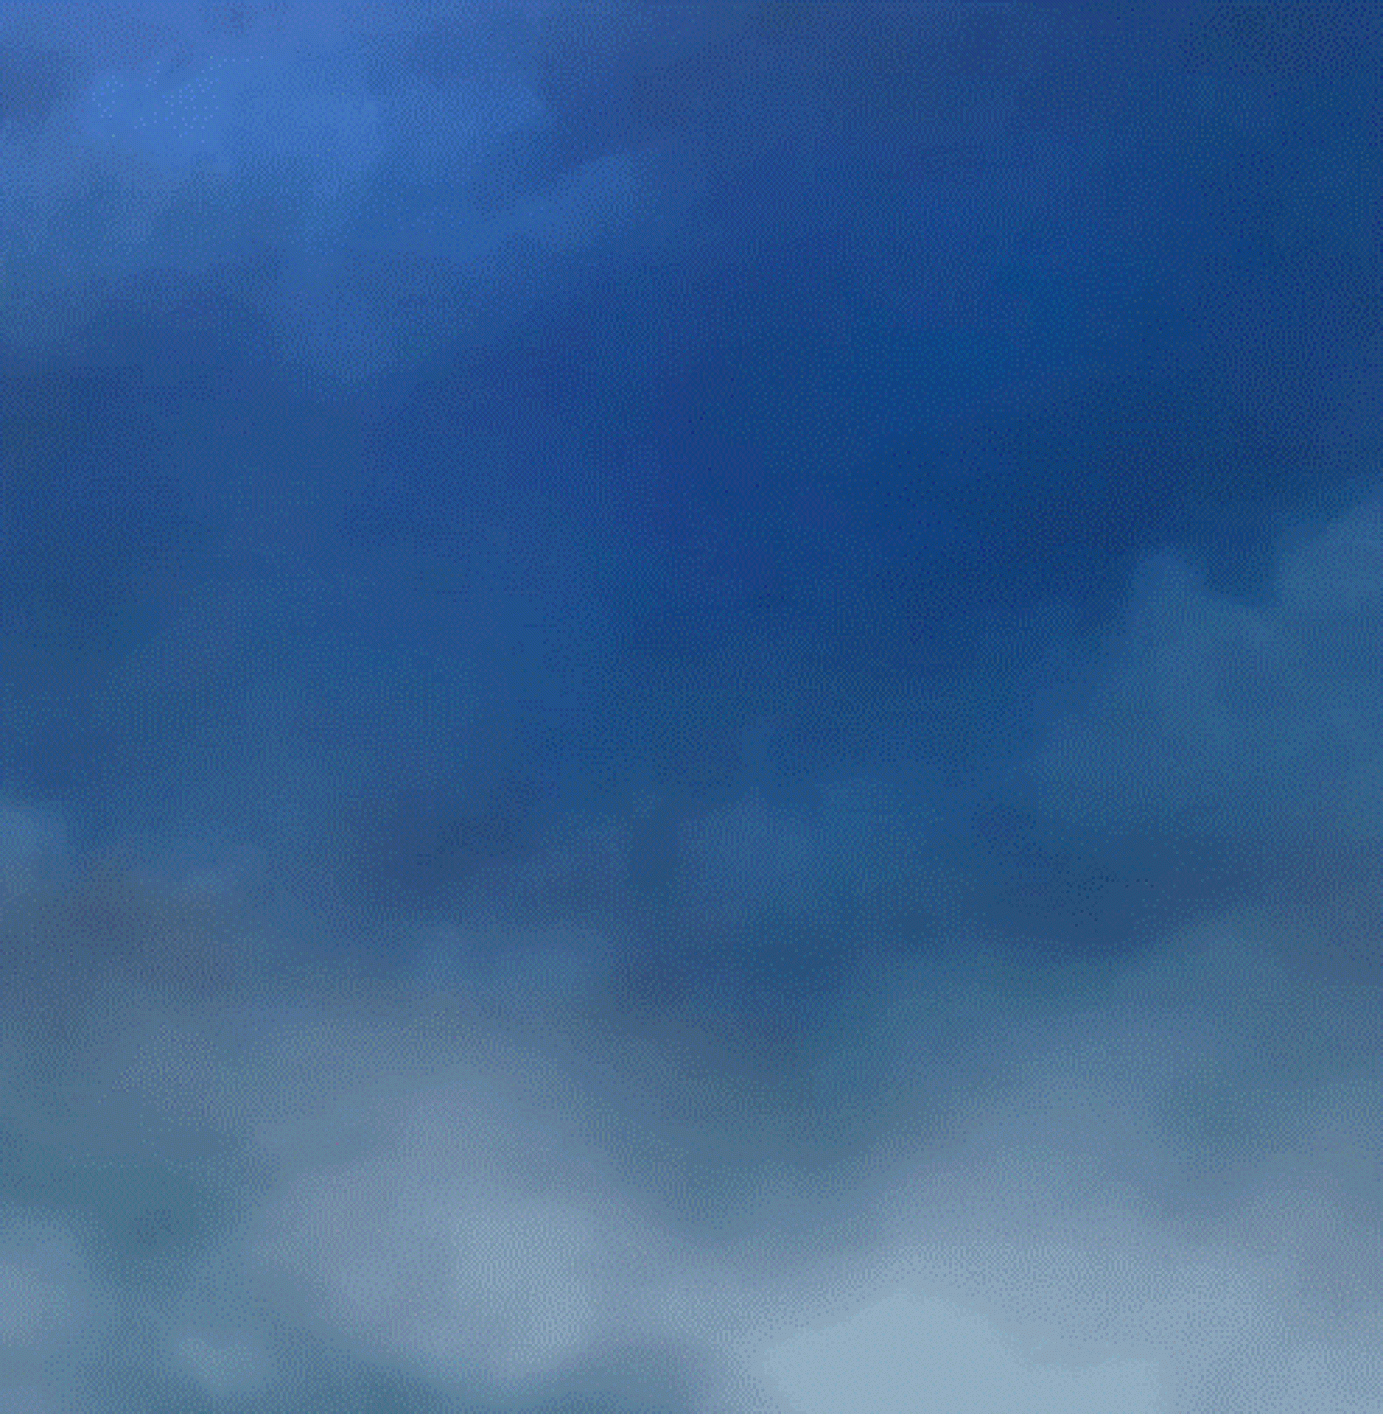 Blue Sky Painted Animation